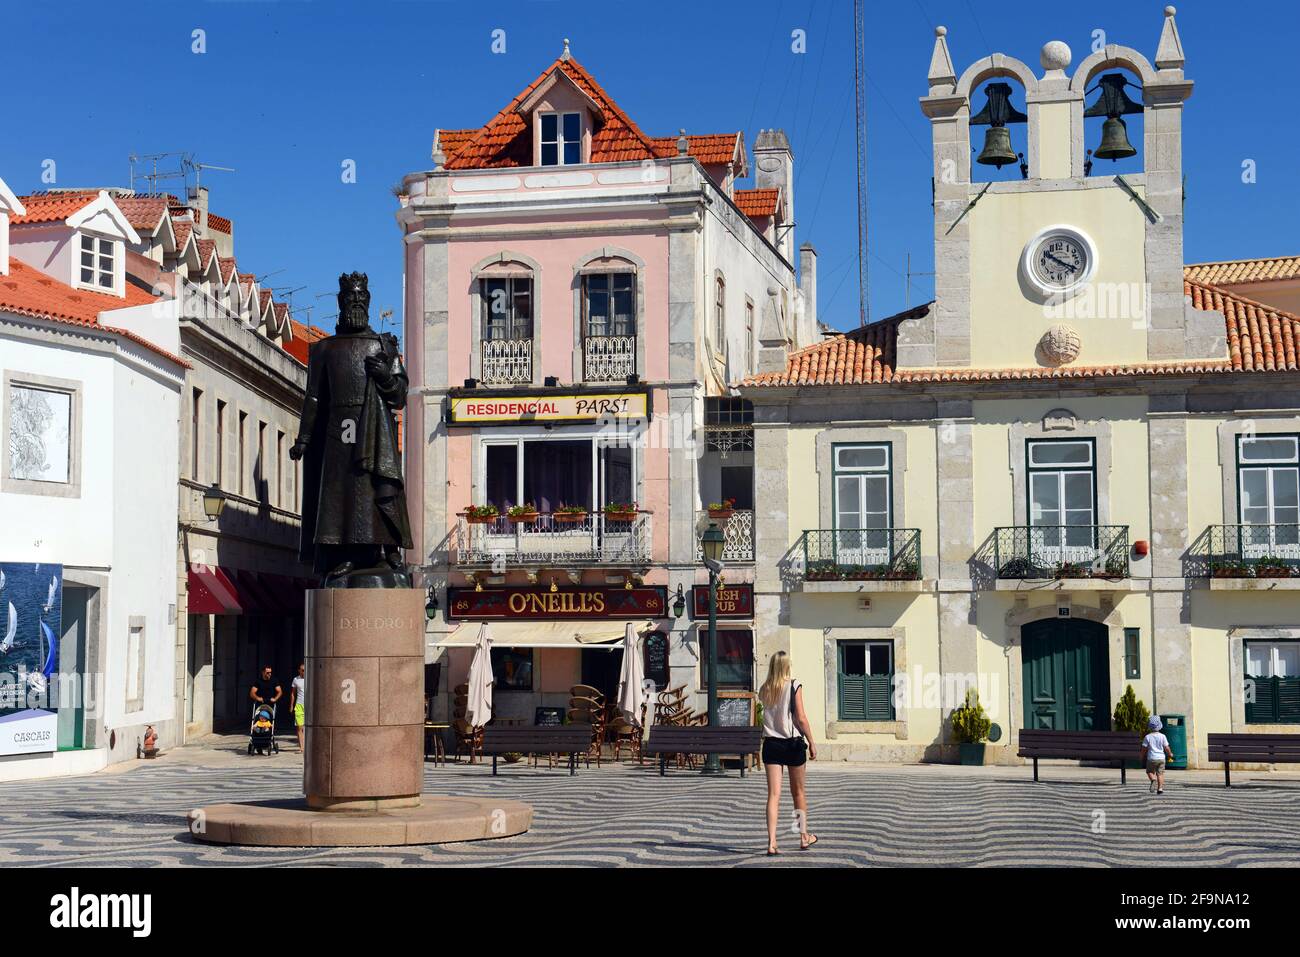 The Central Town square of Cascais, Portugal. Stock Photo